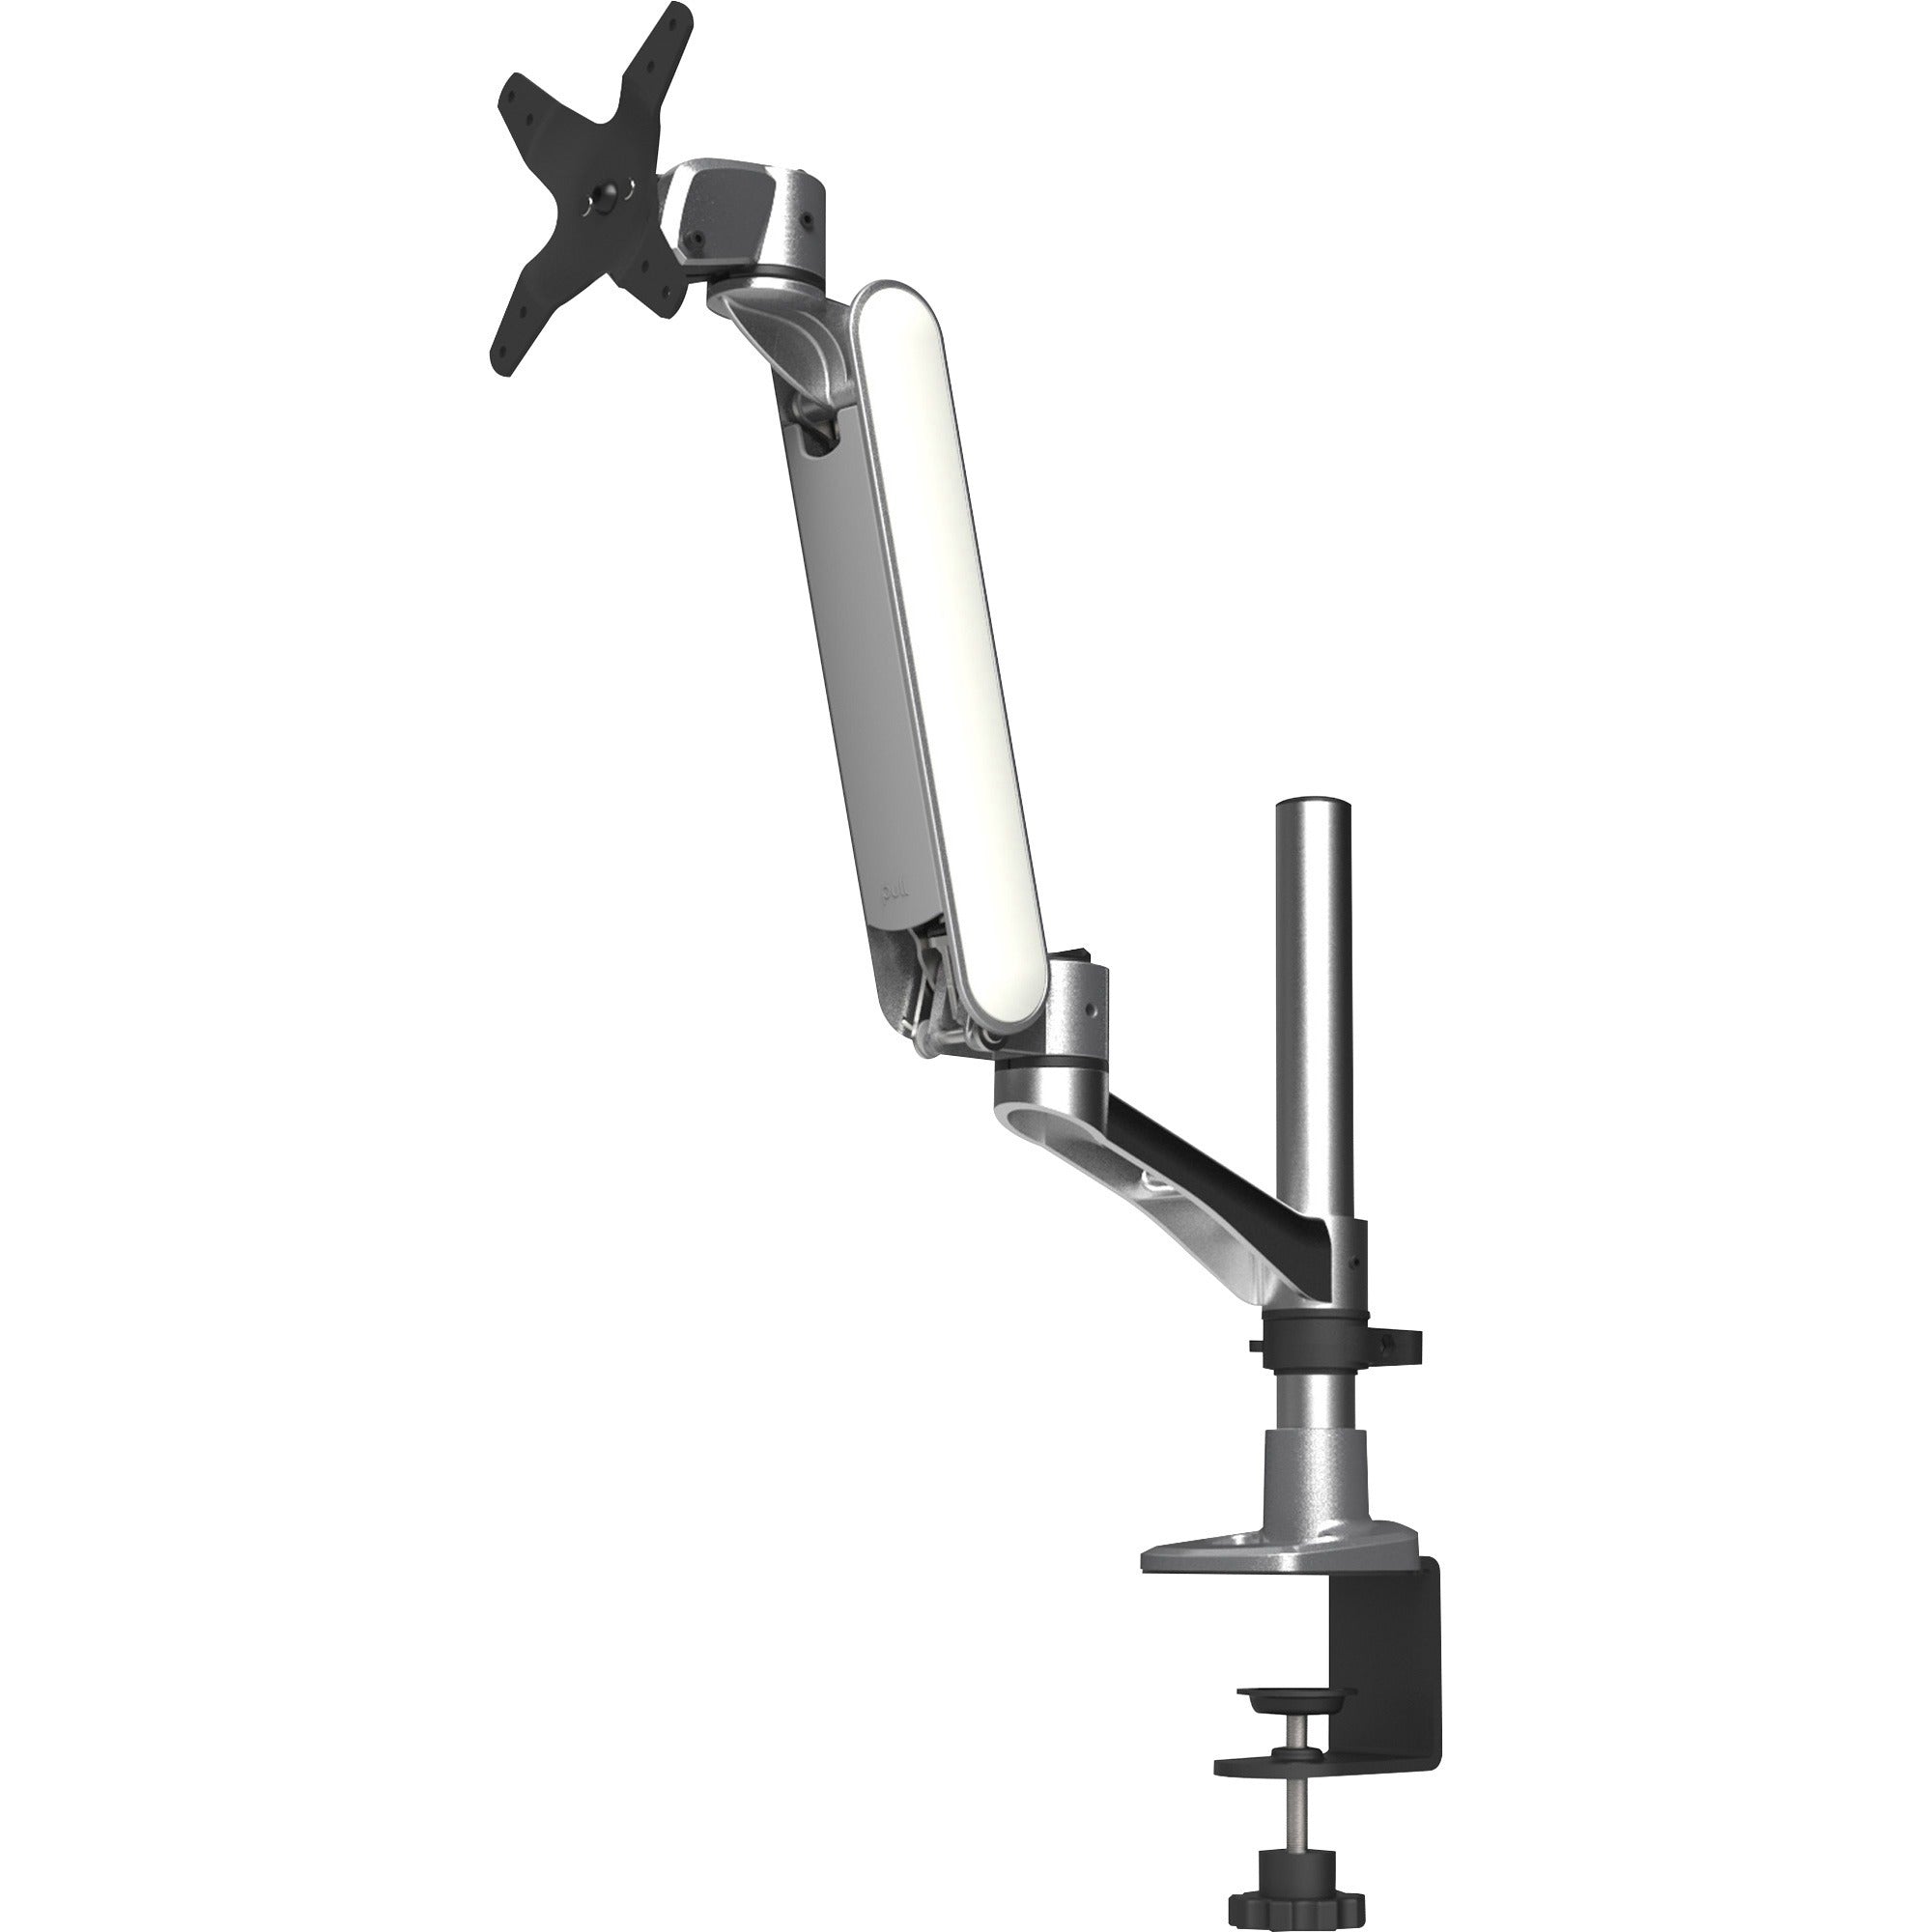 kantek-ma310-mounting-arm-for-monitor-silver-taa-compliant-1-displays-supported-30-screen-support-1-each_ktkma310 - 1